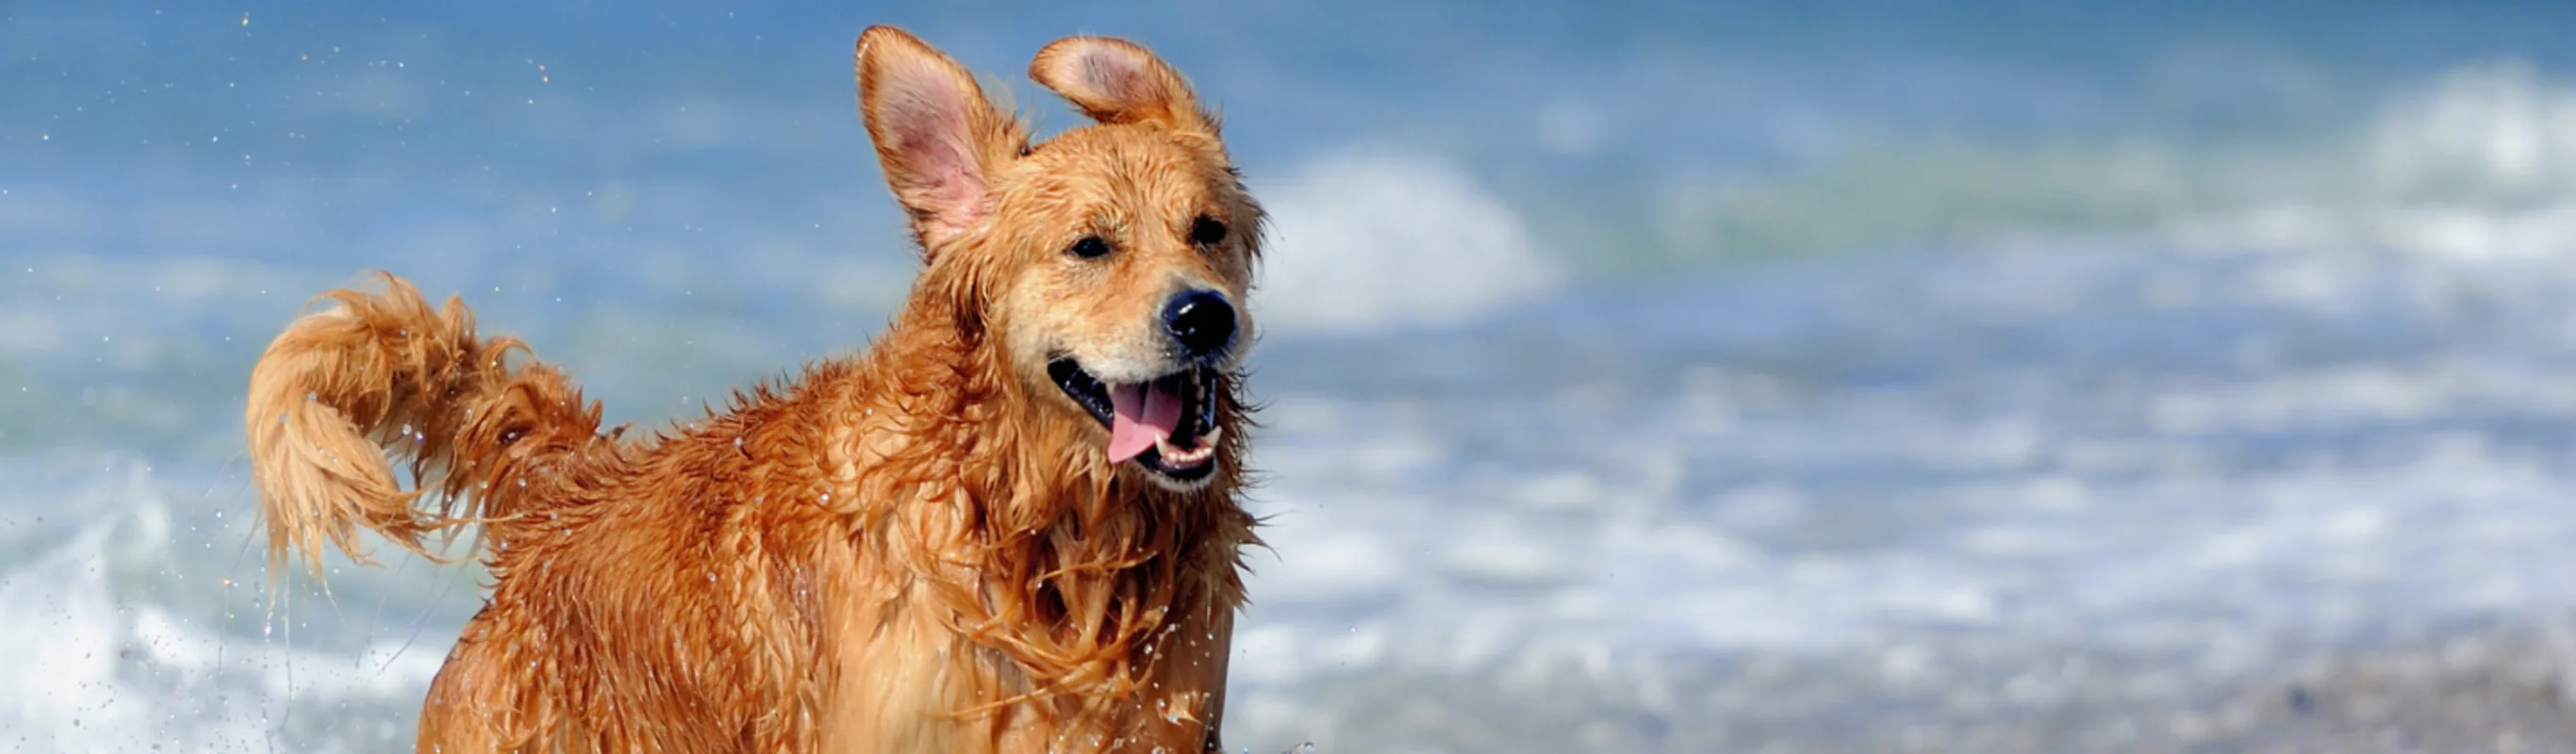 Image of dog with tongue out at beach with text "Veterinary regenerative medicine/ orthobiologics"